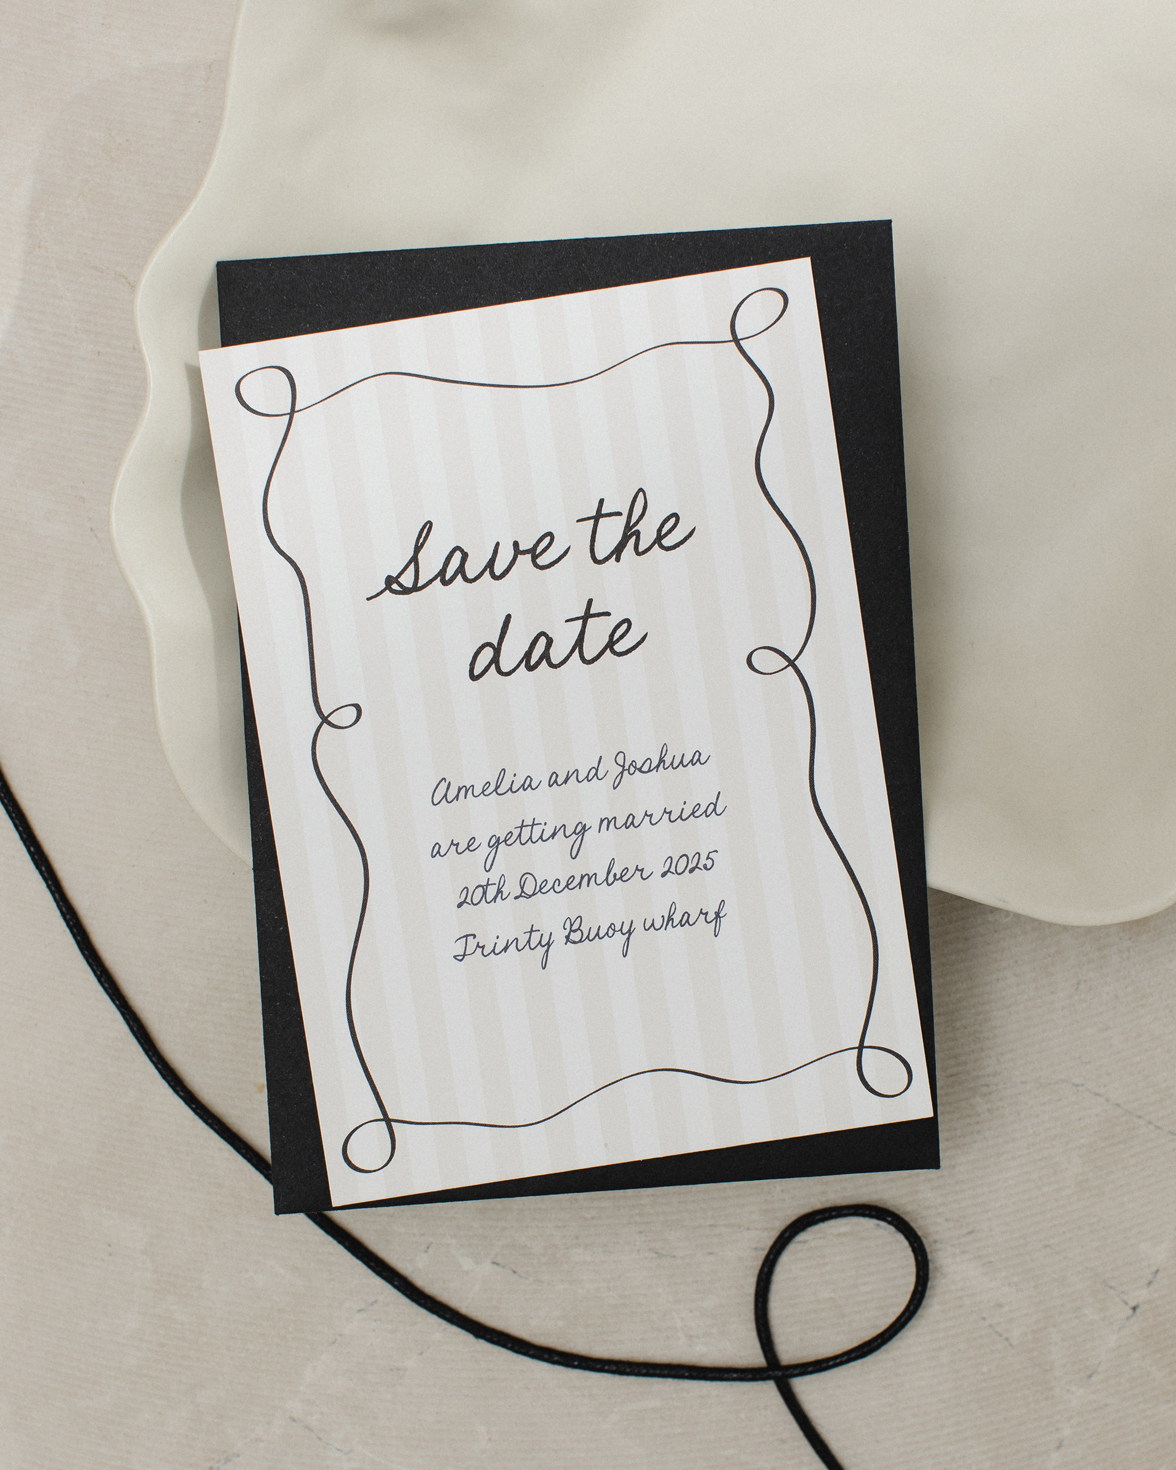 Tonal stripe wedding save the date with squiggly border and hand drawn font. Black envelope